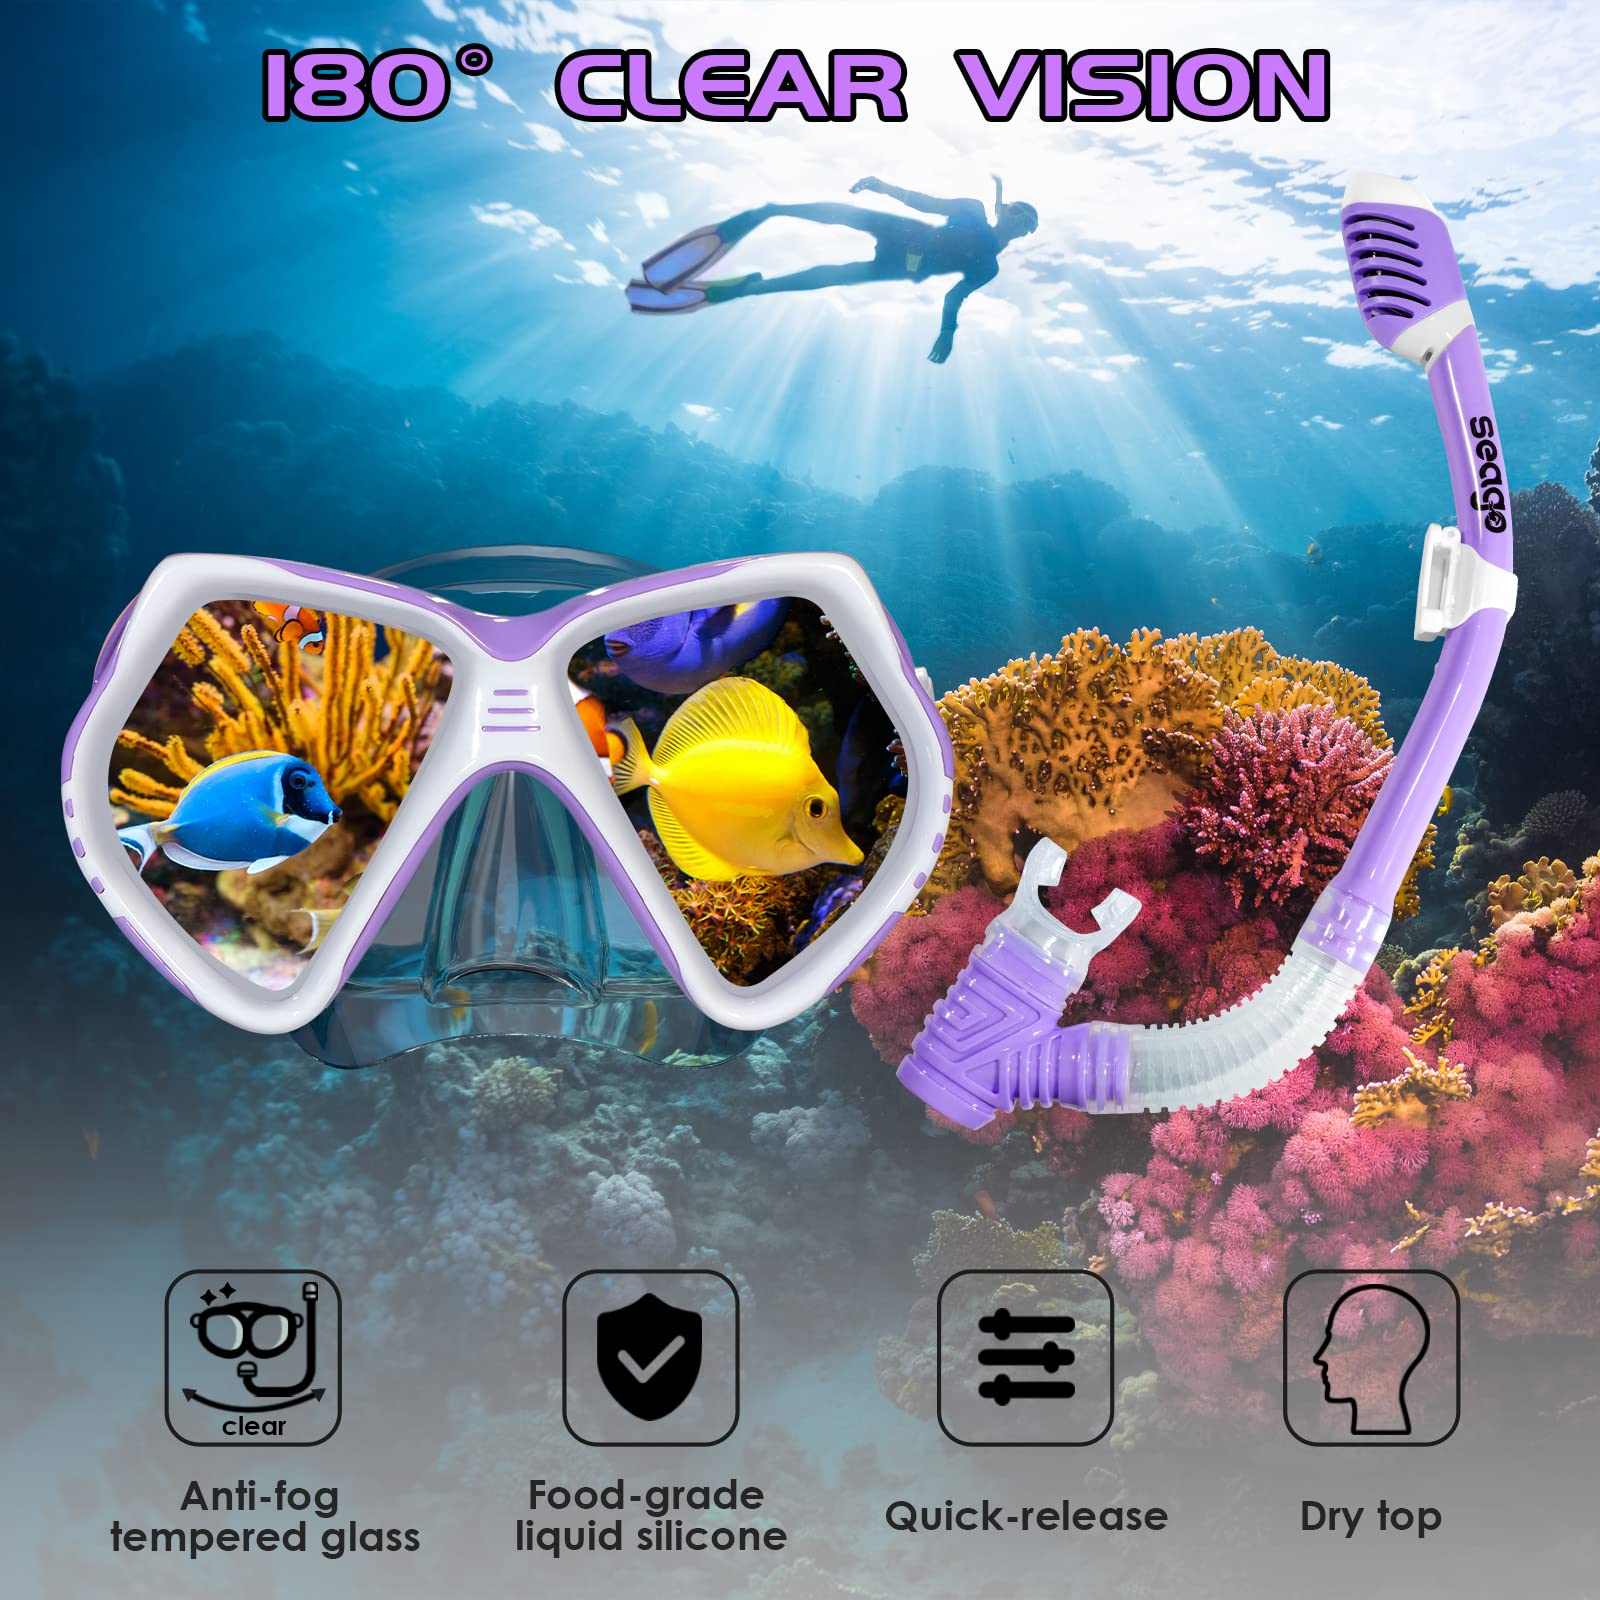 Seago Kids Snorkel Set with Adjustable Flippers Dry Top Snorkel, Snorkeling Diving Gear for Kids Youth(10C-7Y) with Mesh Bag